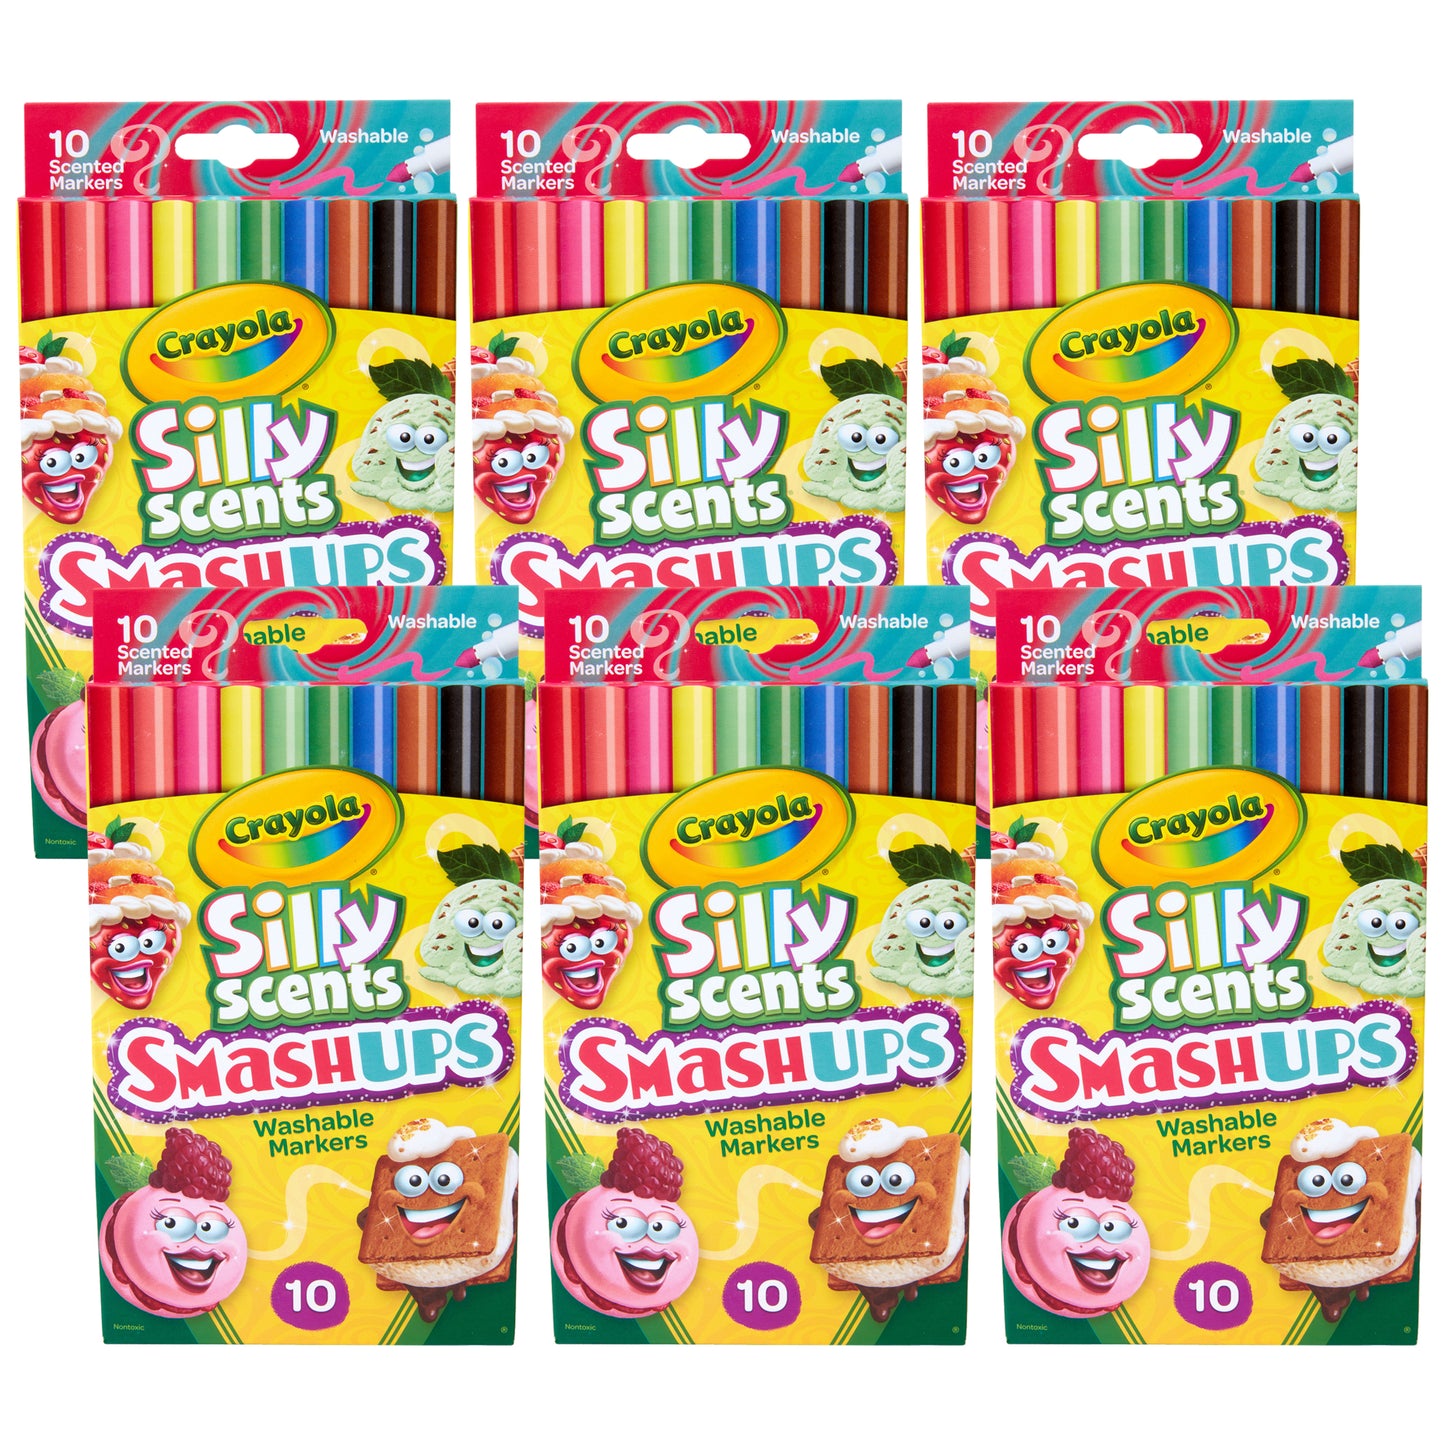 Silly Scents™ Smash Ups Slim Washable Scented Markers, 10 Per Pack, 6 Packs